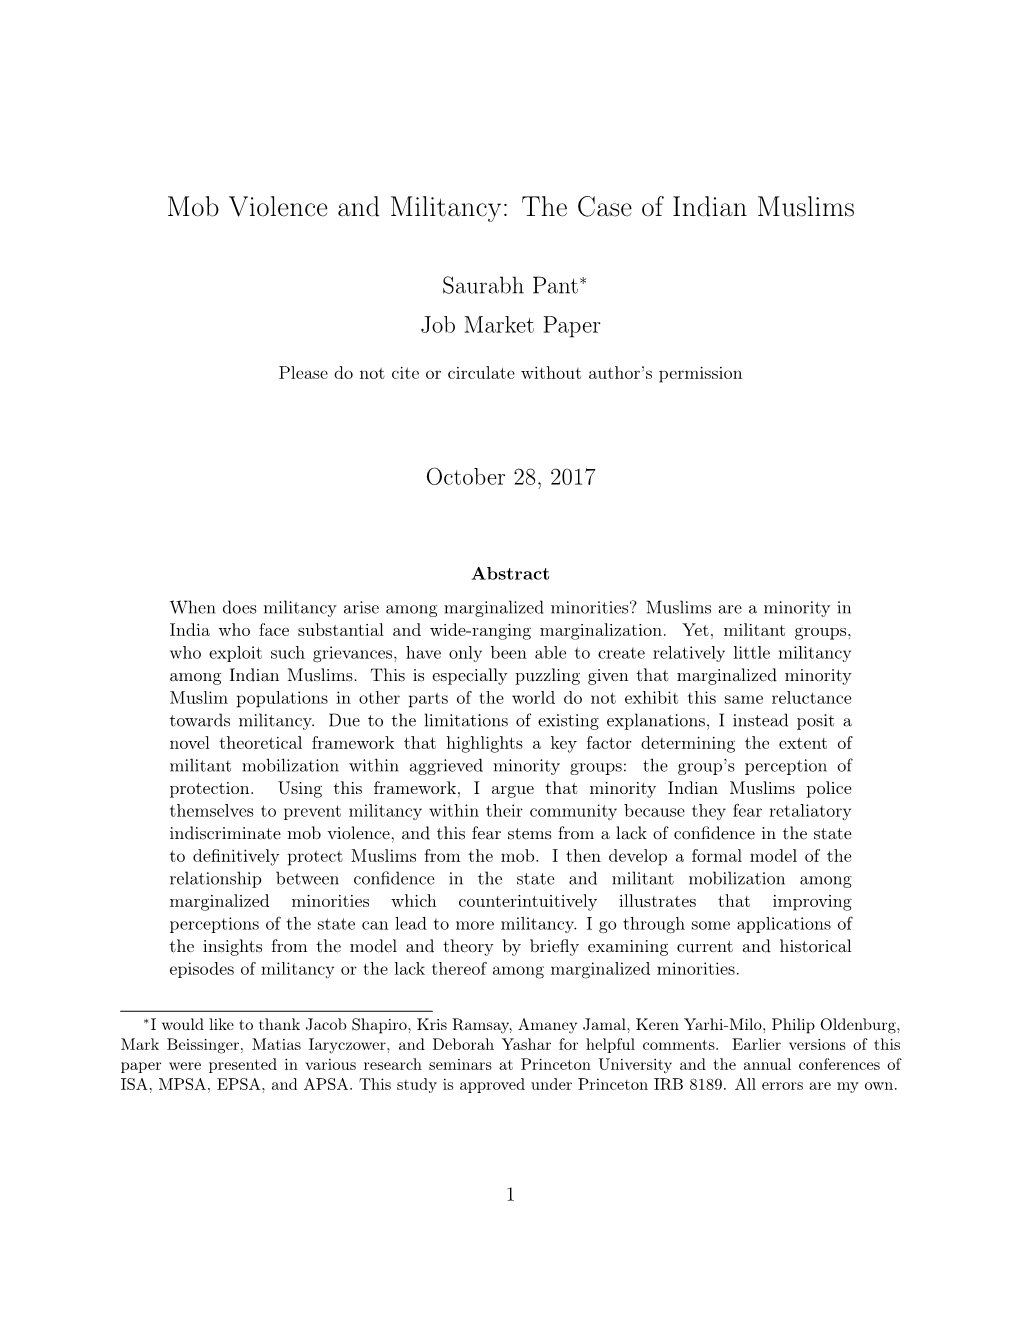 Mob Violence and Militancy: the Case of Indian Muslims